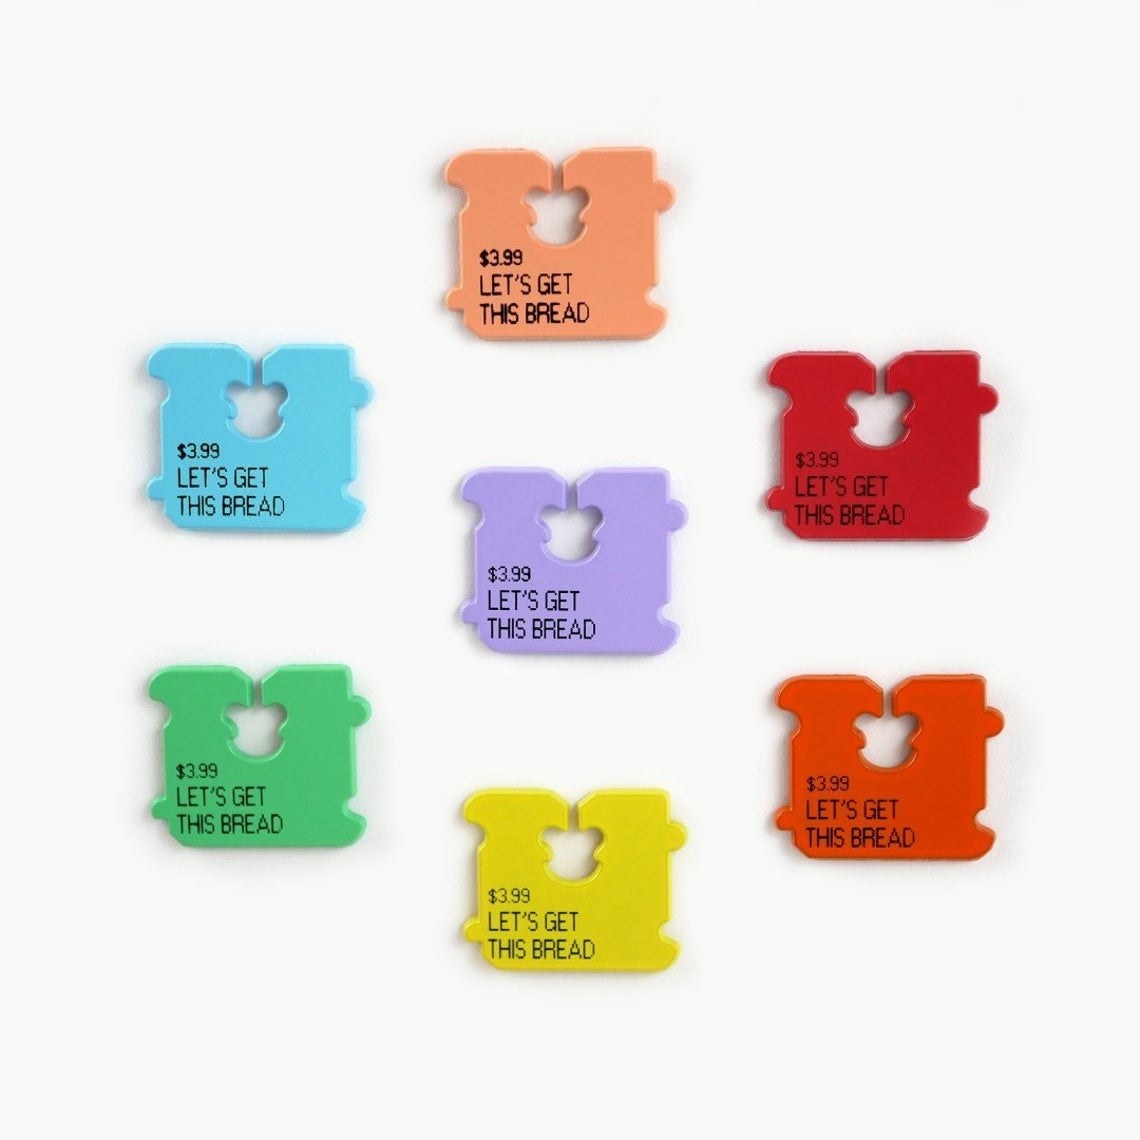 The bread tag pin in all seven colors